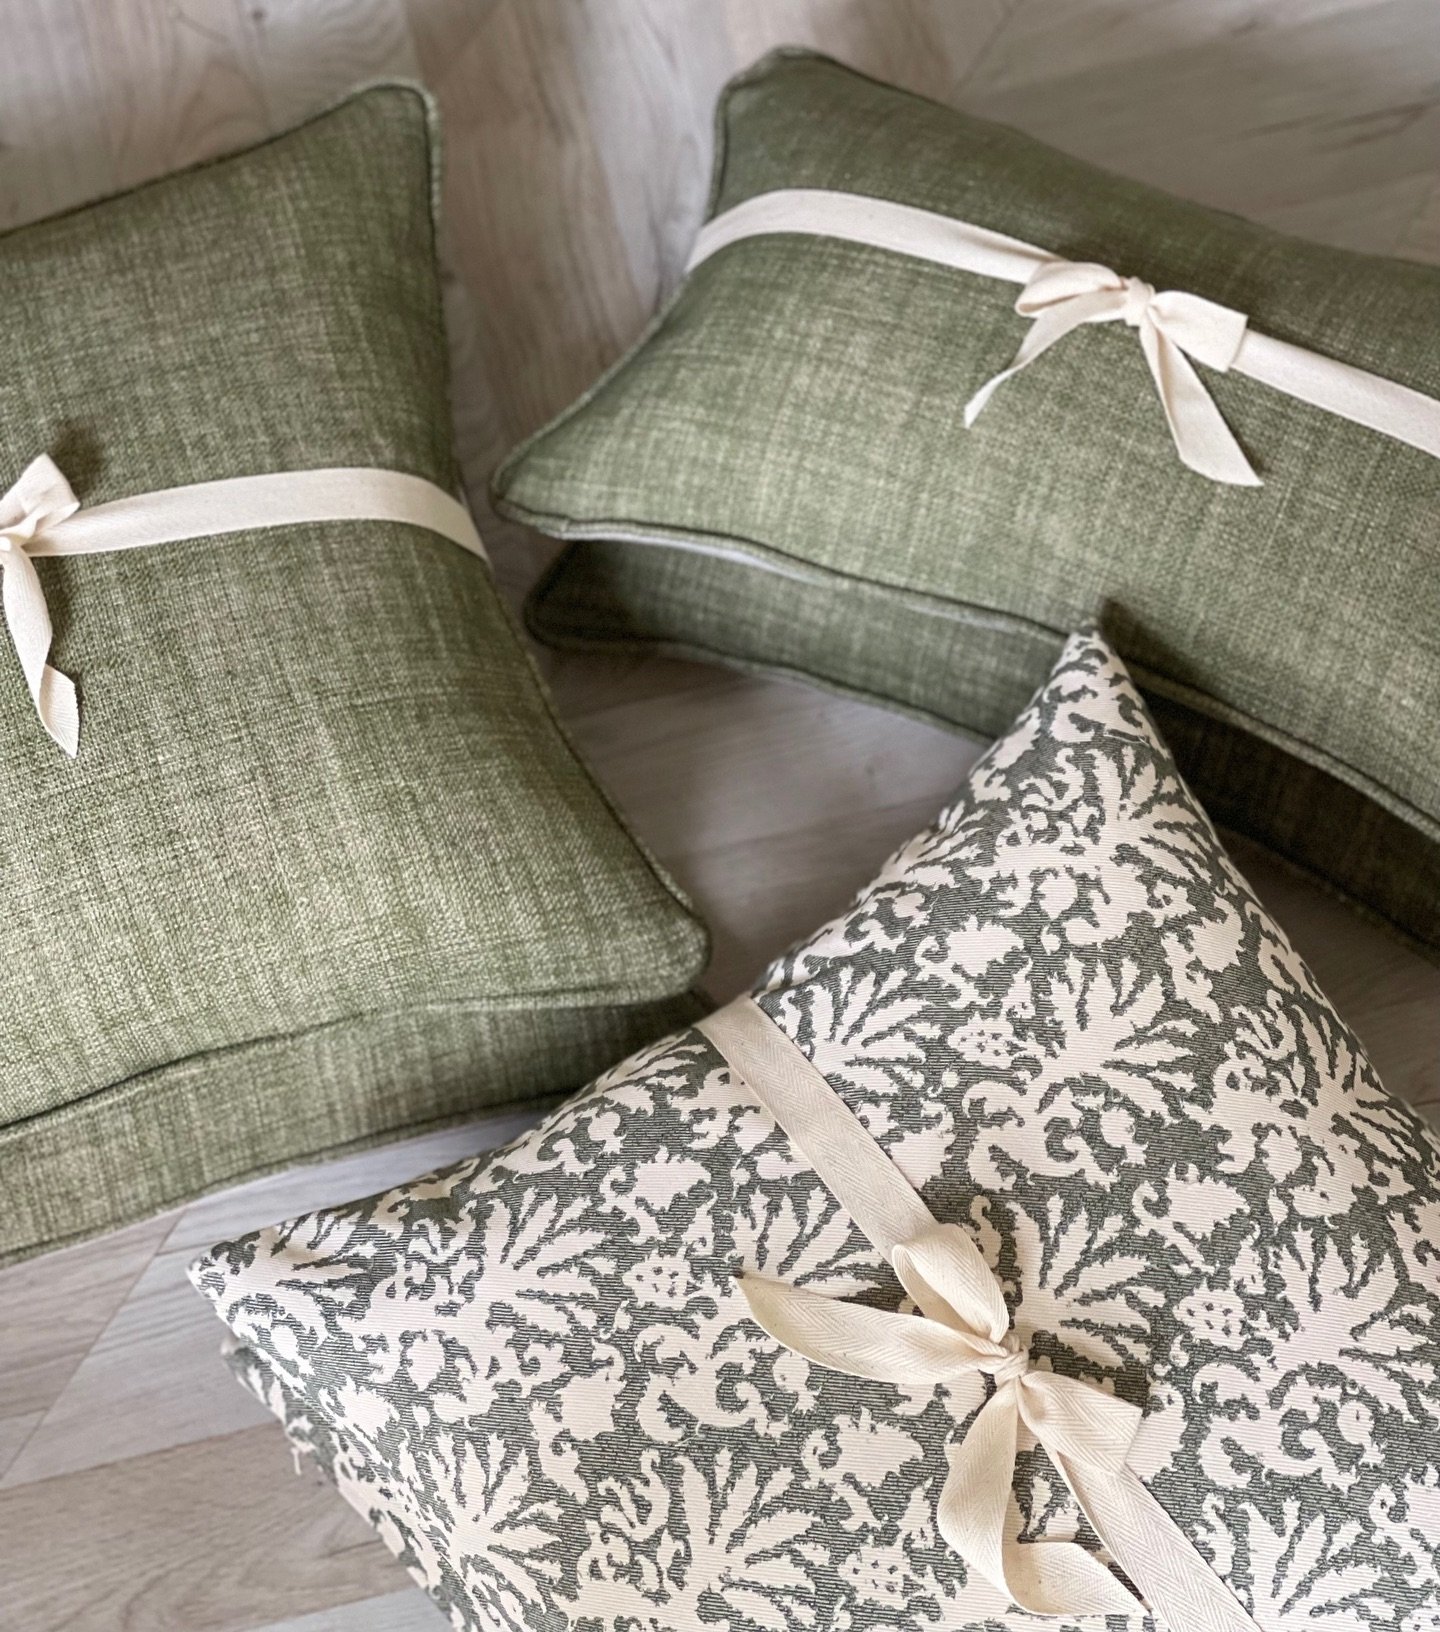 Did you know we can do bespoke orders? 

These beautiful piped cushions made from fabric a customer had left over from curtains were made to order in her chosen sizes - we are obsessed with this green and print combination! 

If you&rsquo;d like some